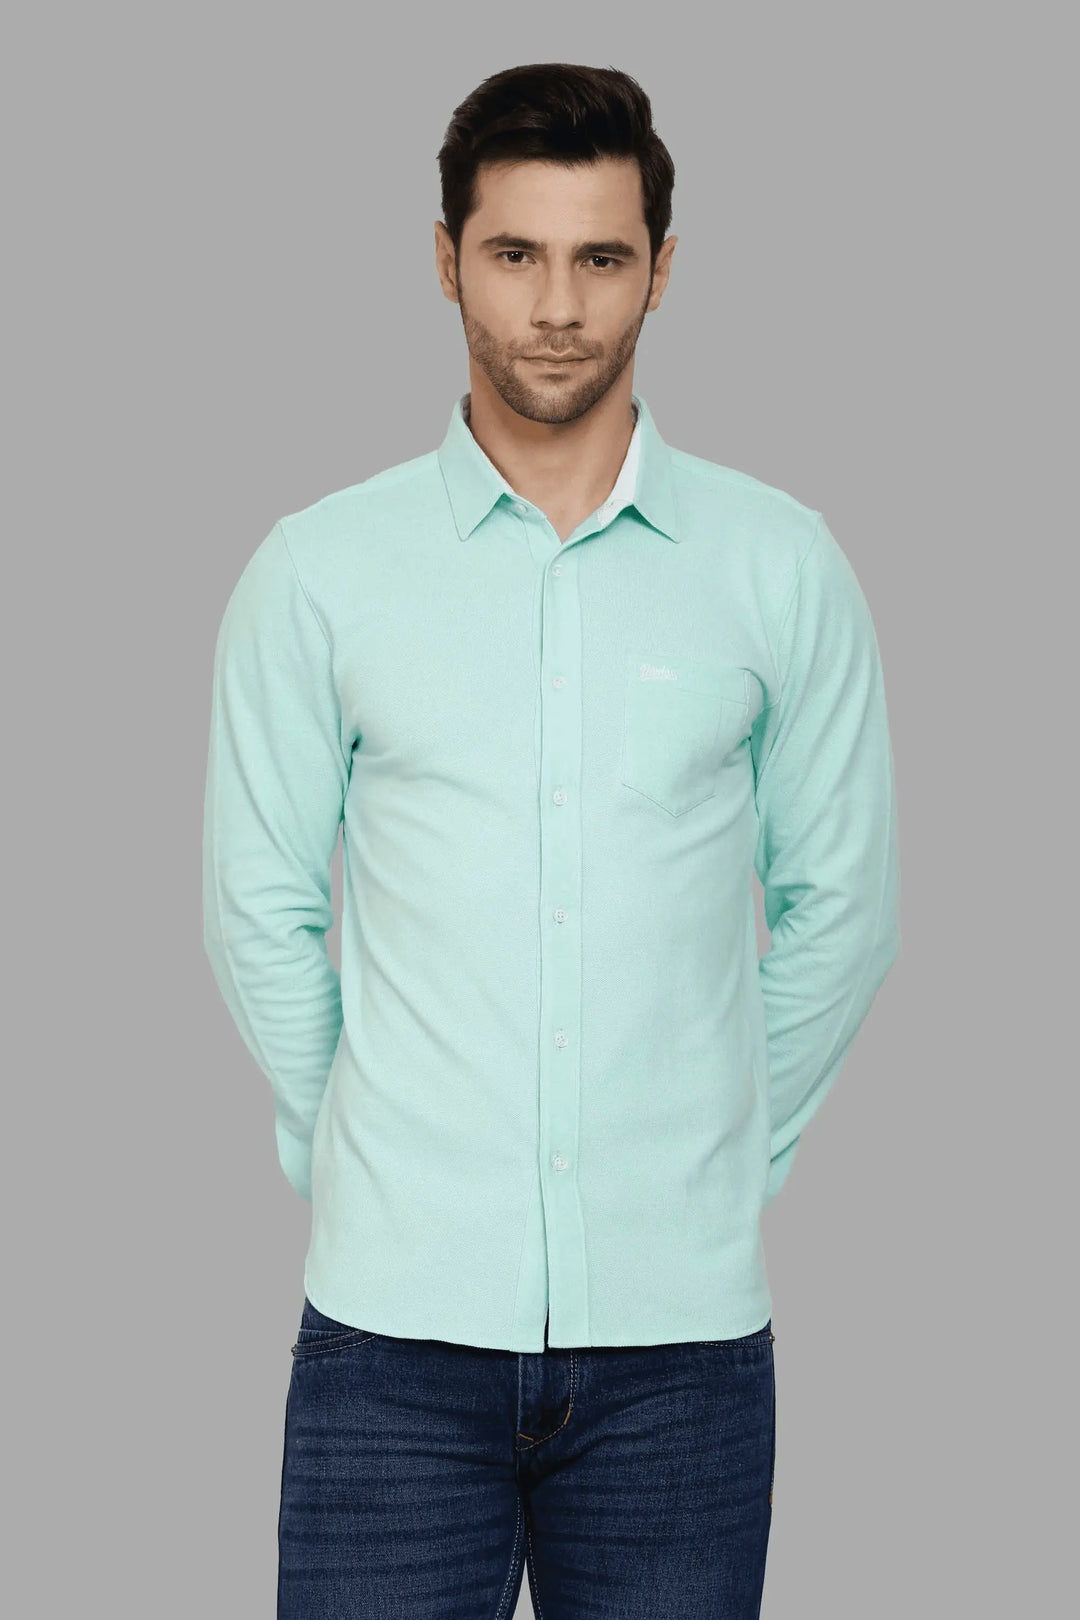 Best party wear full Sleeve Polo  shirt in mens fashion . And it's conmfortable and perfect look in reasonable price.